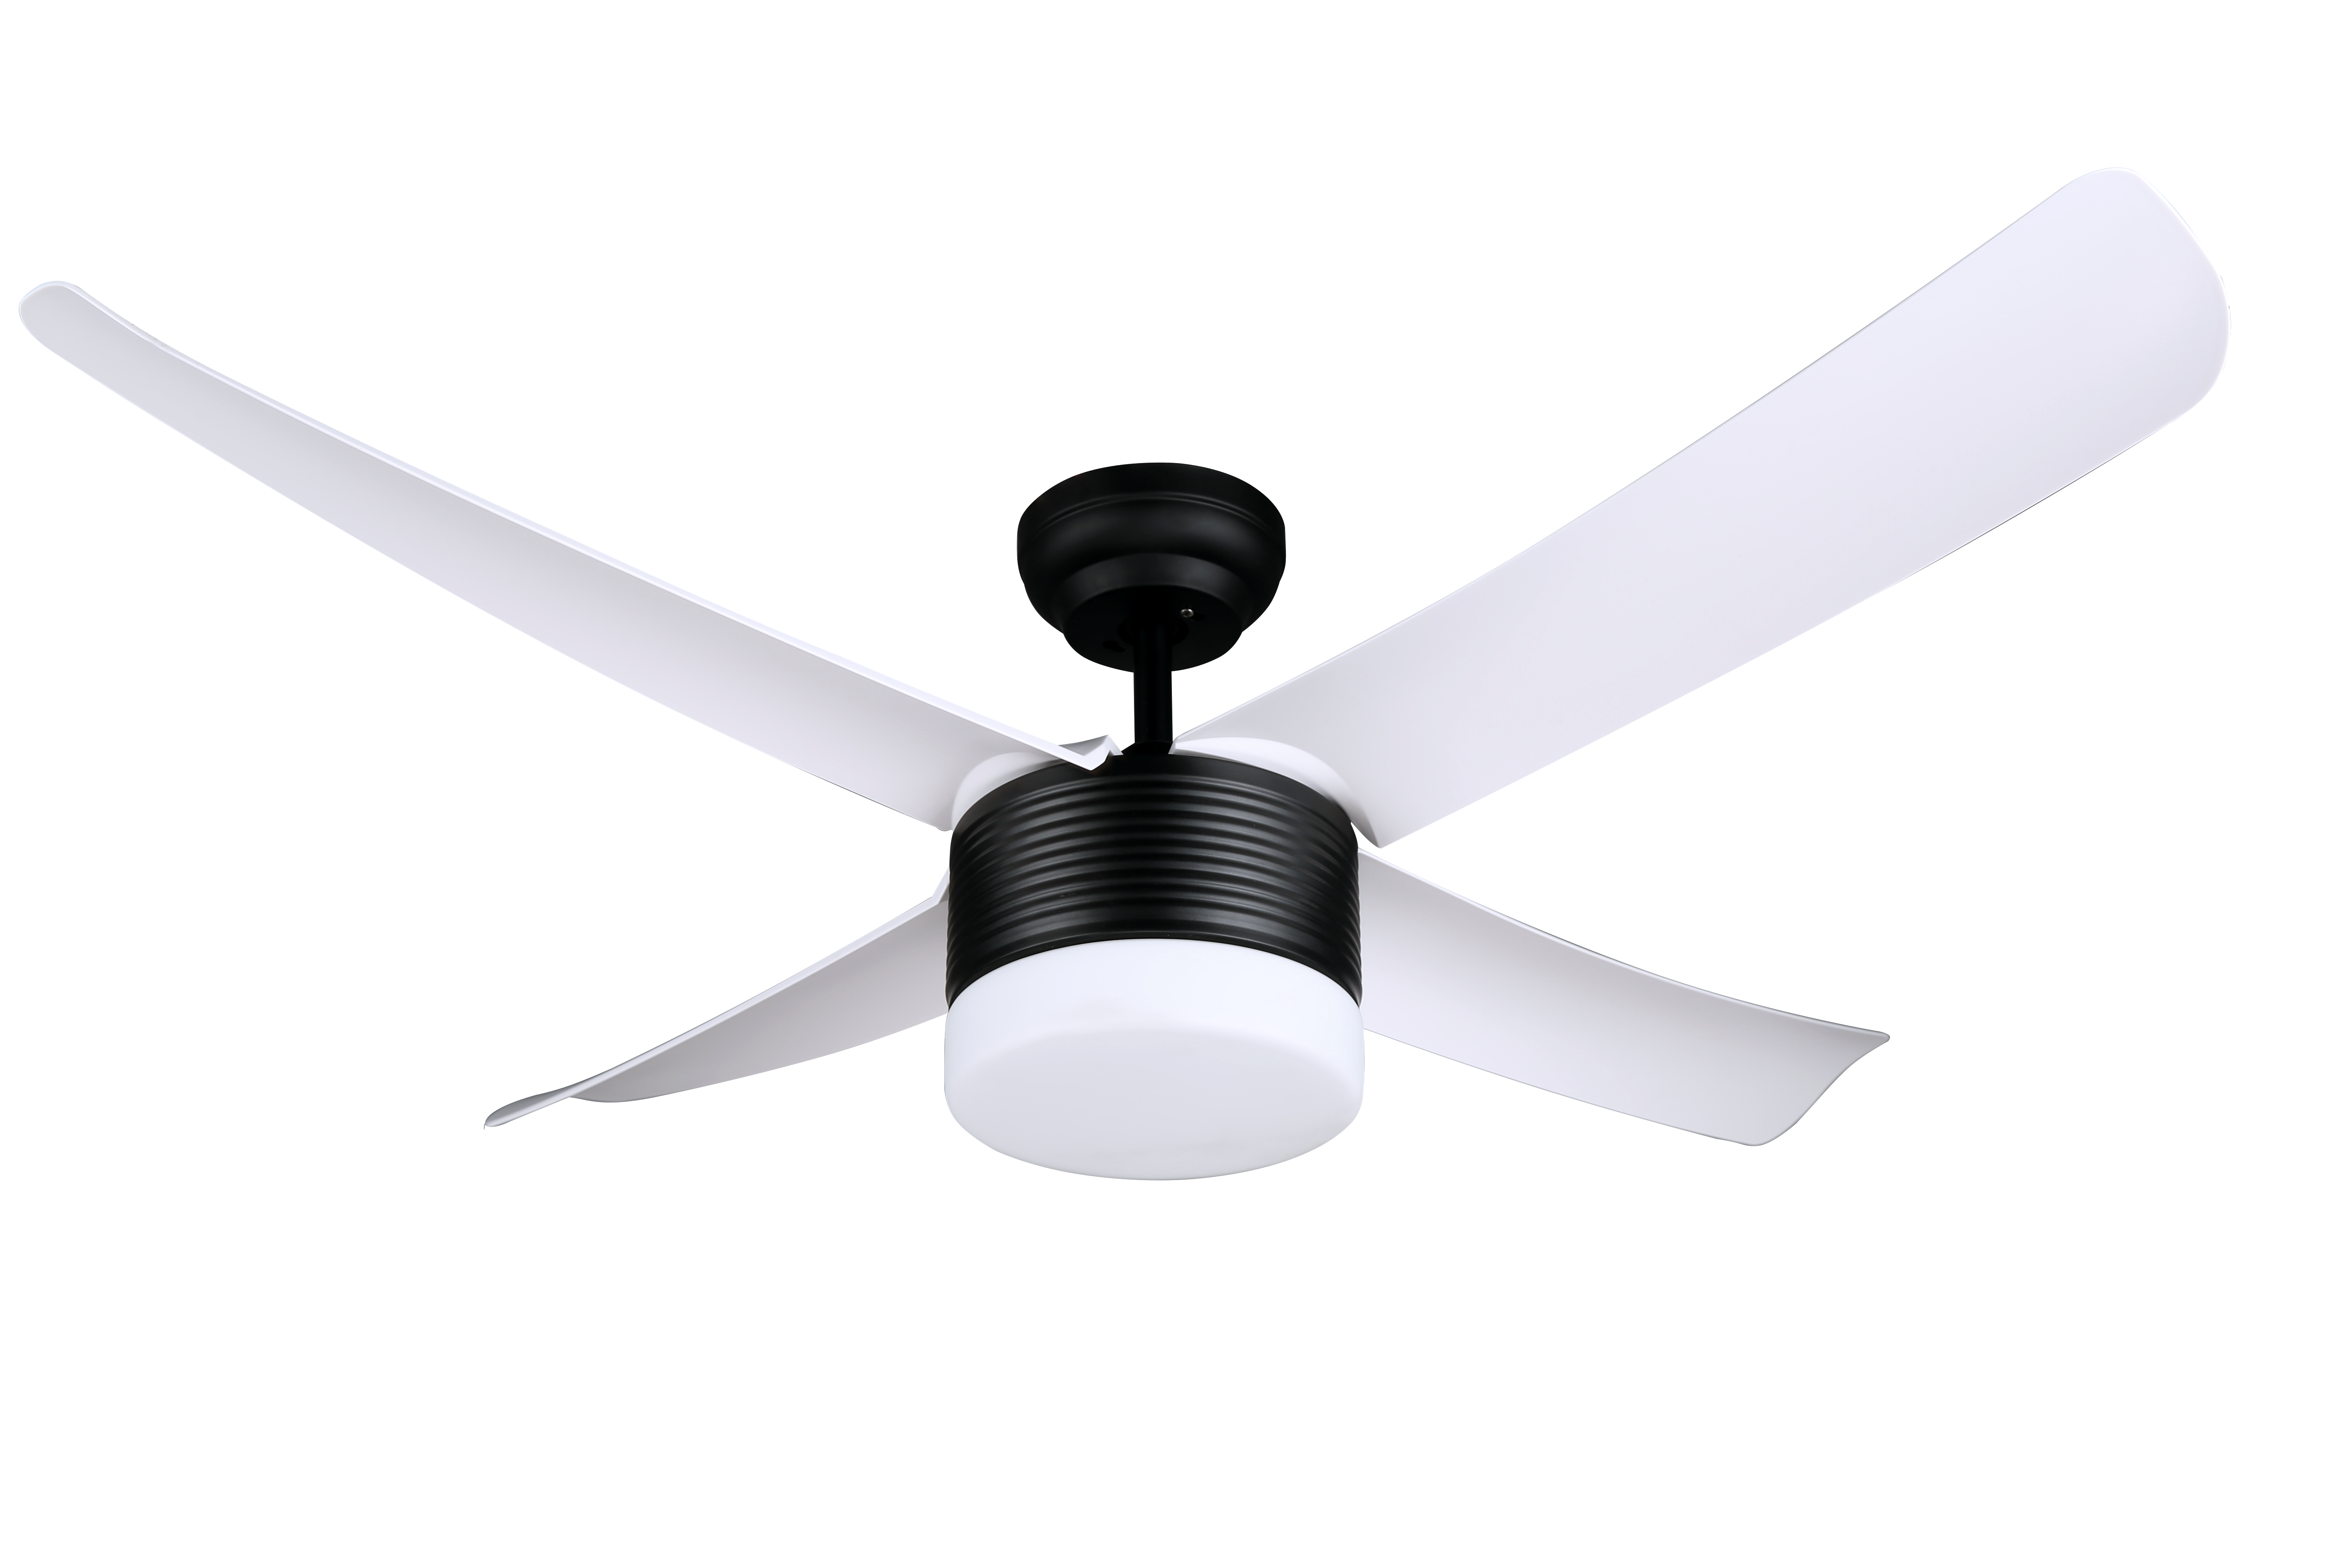 52YF-7 Ceiling Fan Dimmable LED Light, DC 30W Motor, ABS Blades - MS/BK/WH-Remote Control Ceiling Fan With Light--fans light